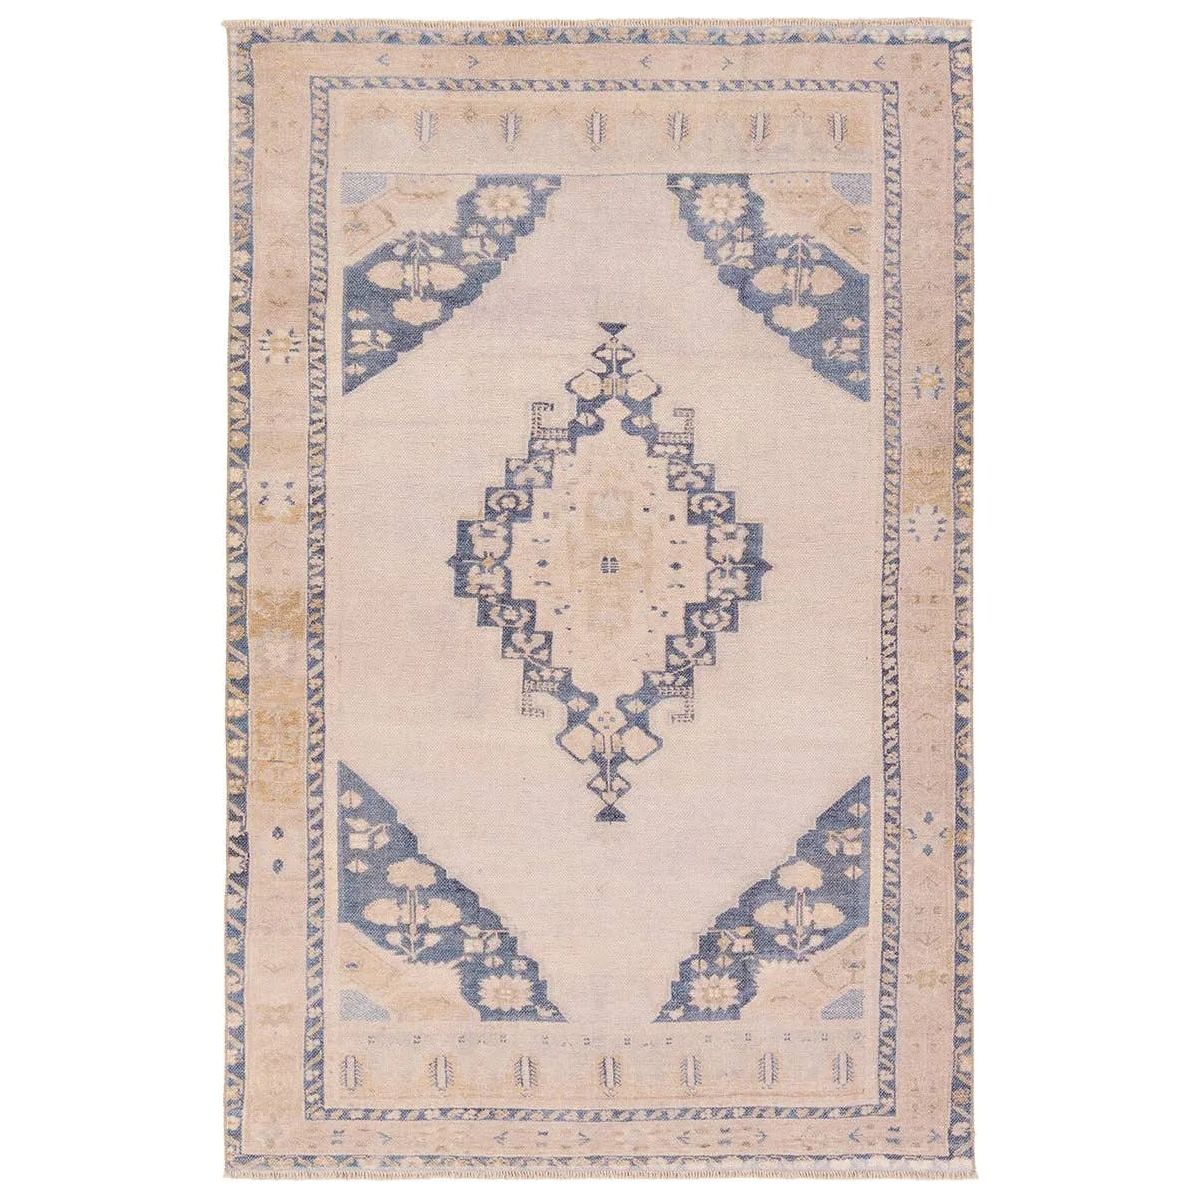 Distressed, vintage designs offer an elevated tone for the Lumal Collection. The Debolo rug features a vintage-inspired medallion, geometric border, and floral detailing in tones of tan, blue, yellow, and gray. This machine washable rug is stain resistant and easy to clean, perfect for homes with children and pets. Amethyst Home provides interior design, new home construction design consulting, vintage area rugs, and lighting in the Alpharetta metro area.